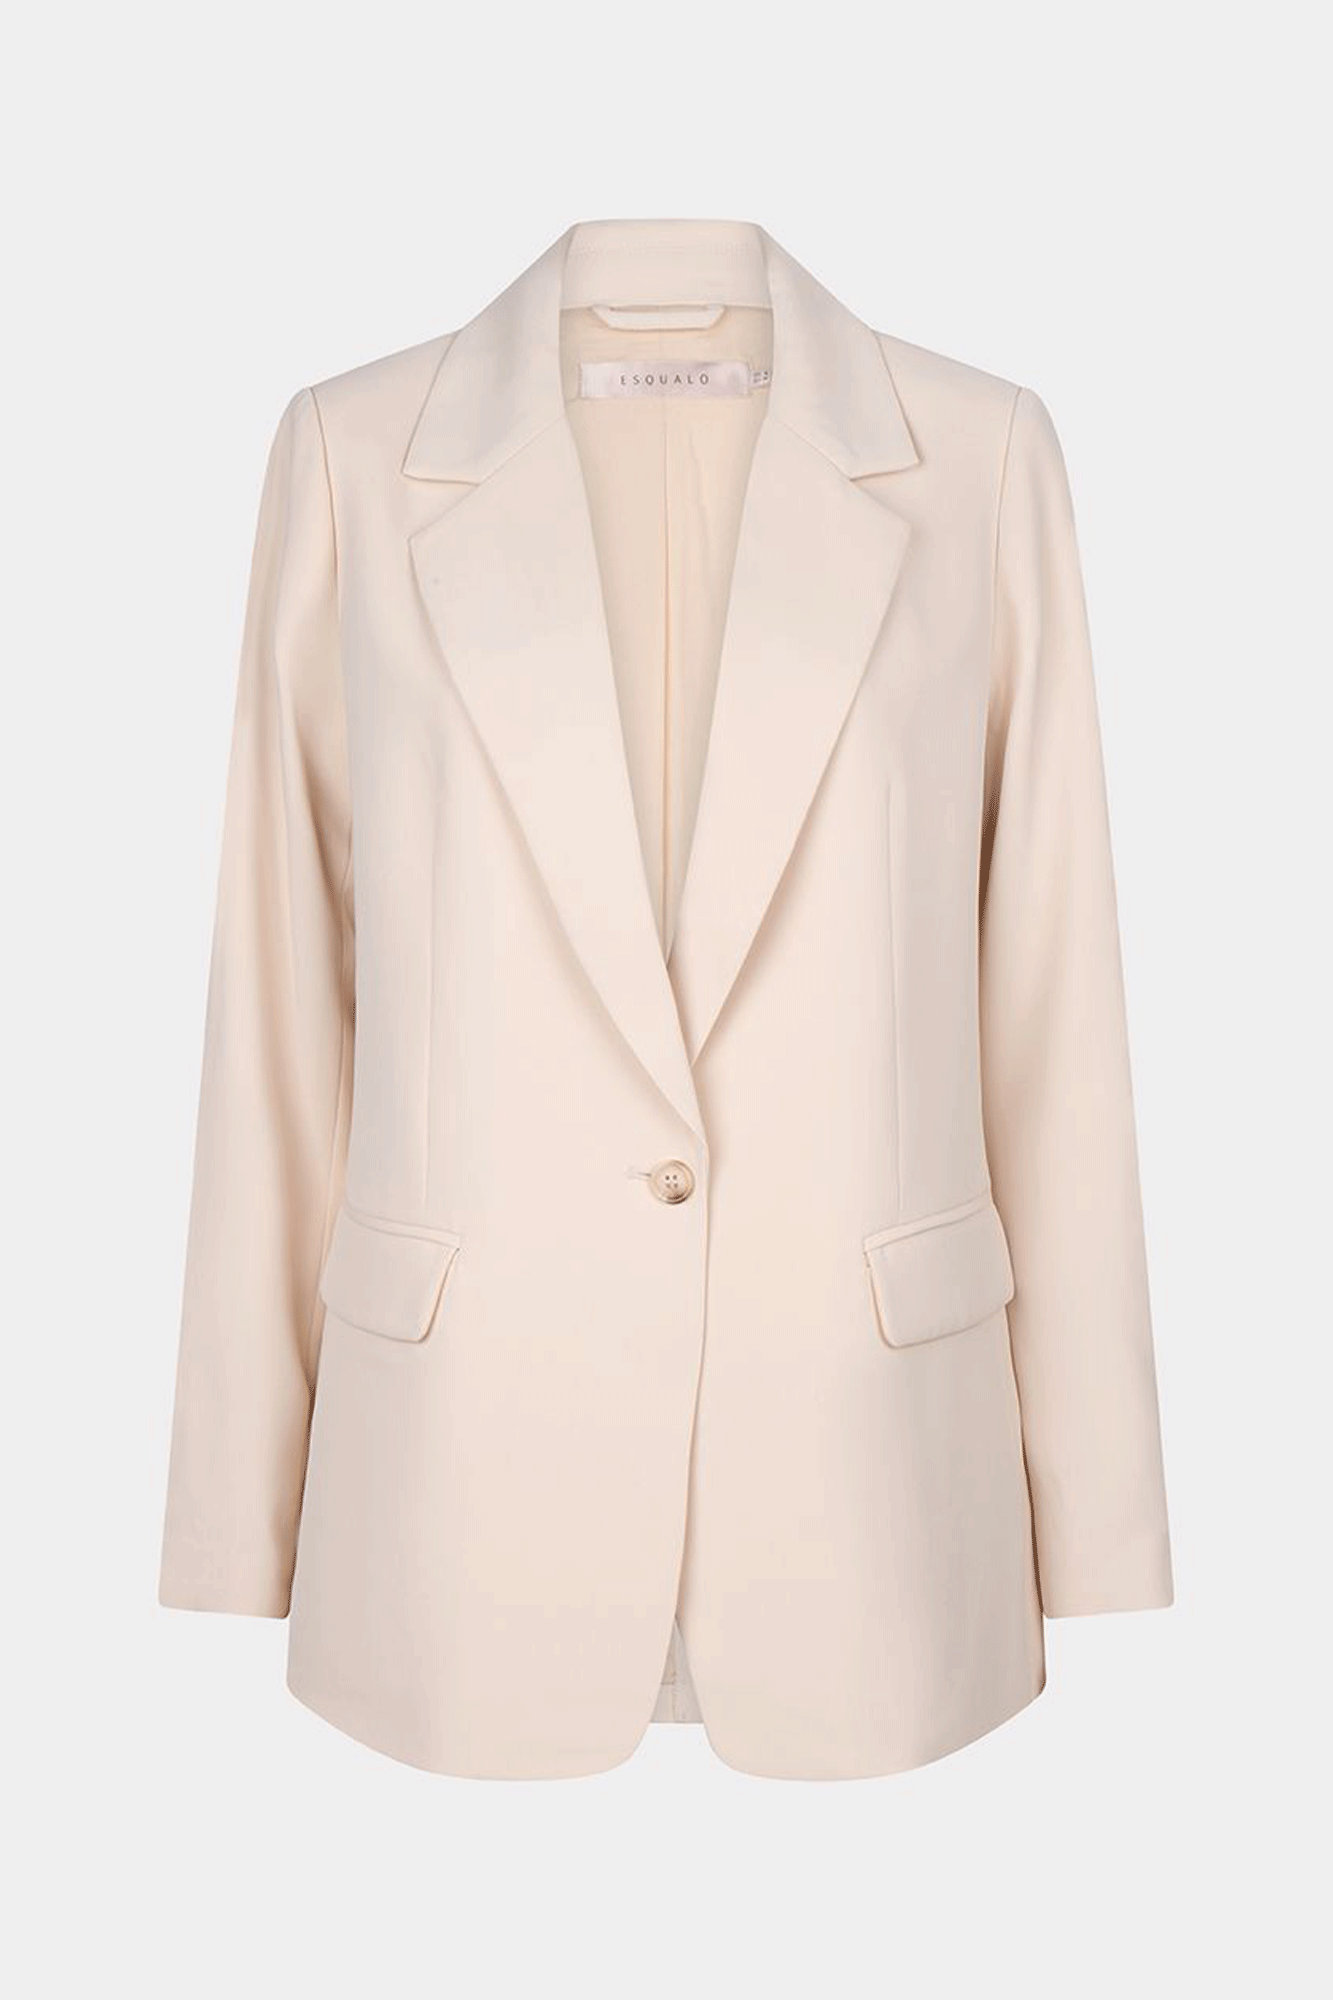 Esqualo (SP2410022) Women's Long Sleeve Tailored Blazer with Notch Collar, Single Button Close, and Front Pockets in Sand Beige